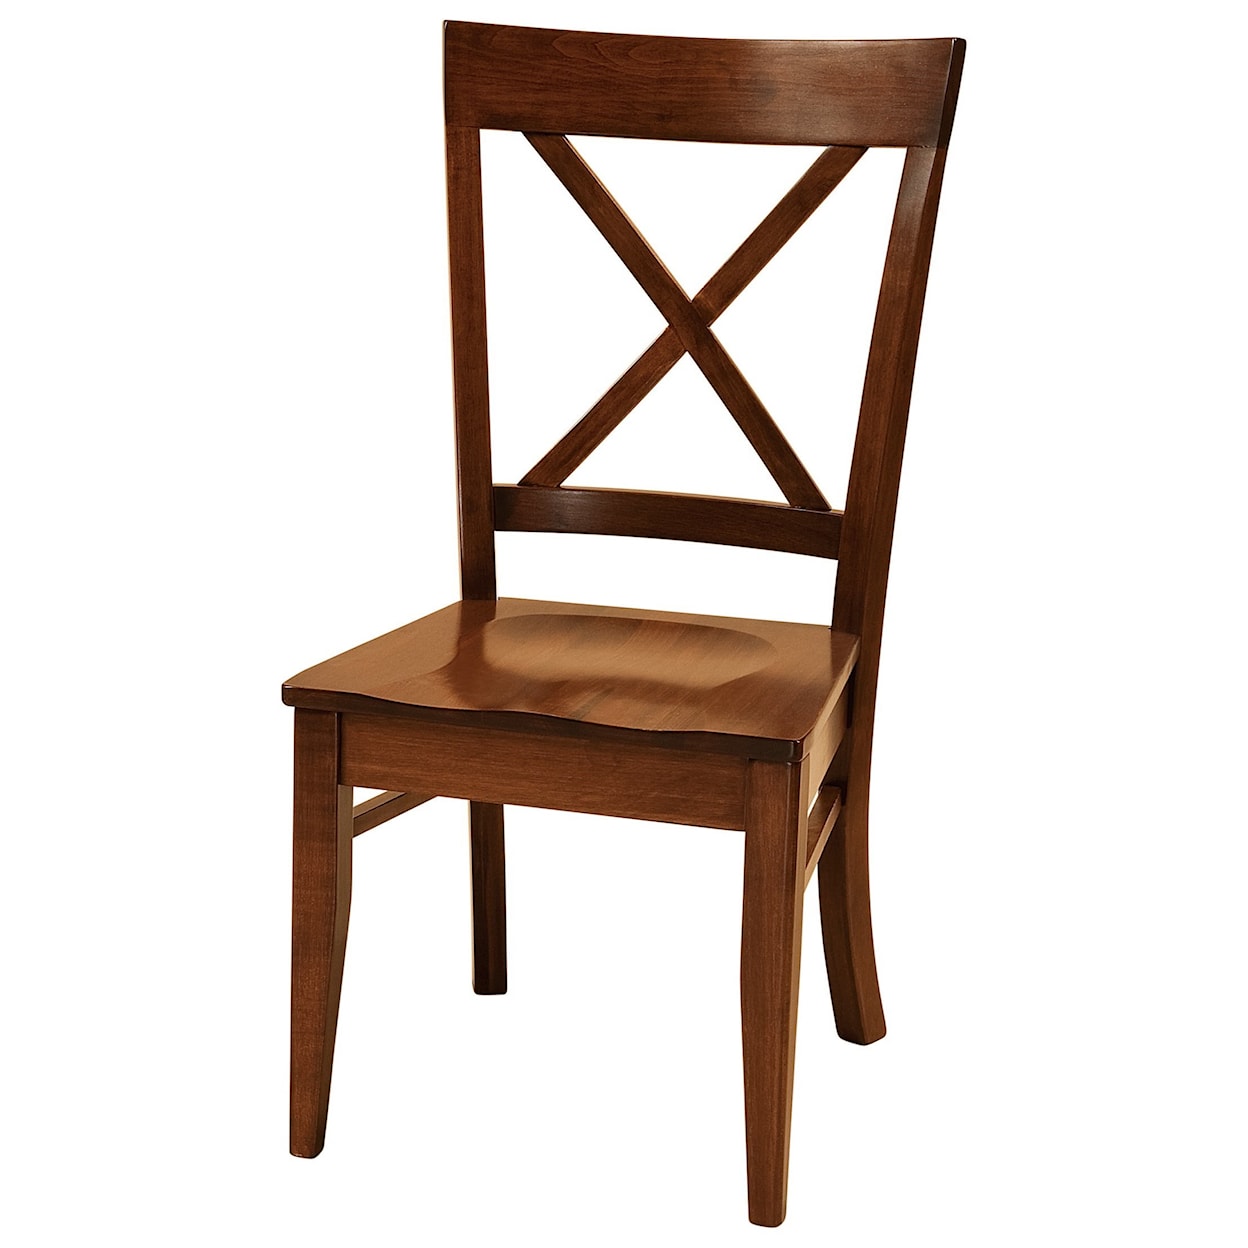 F&N Woodworking Frontier Side Chair - Leather Seat